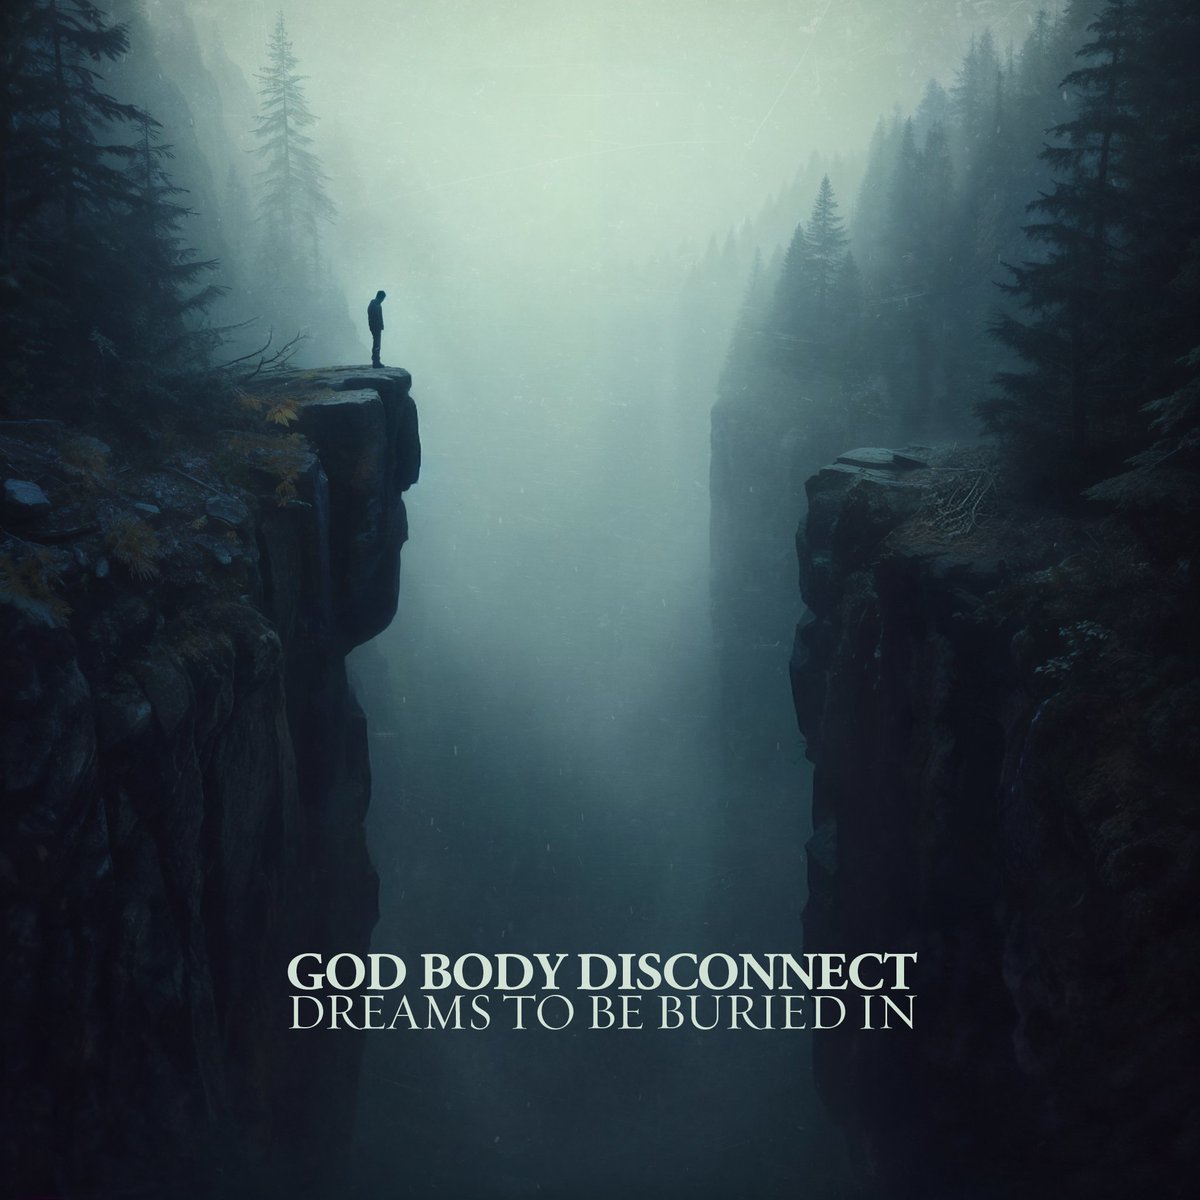 God Body Disconnect - Dreams to be Buried in out on Bandcamp today: cryochamber.bandcamp.com/album/dreams-t…
#ambient #darkambient #postrock